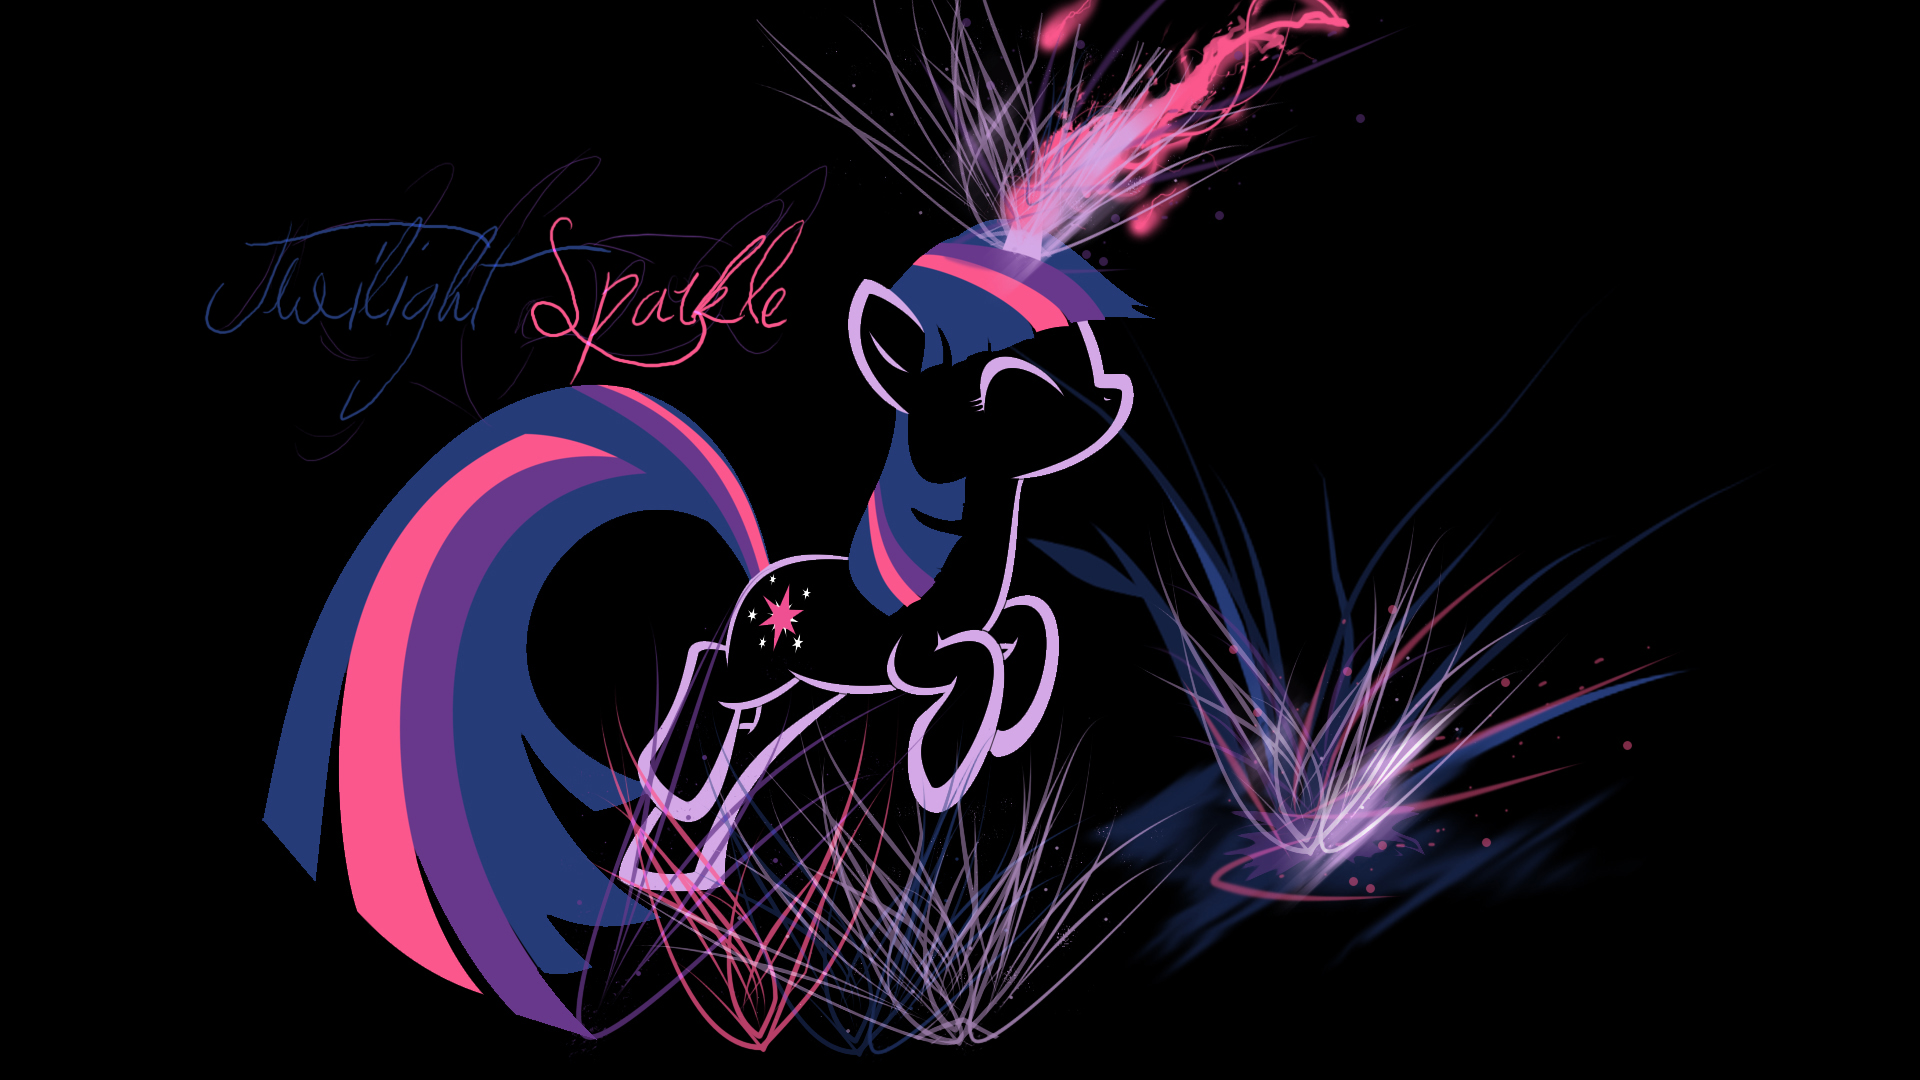 Twilight Sparkle Wallpaper 1920x1080 Px by Pcyzicus and UP1TER